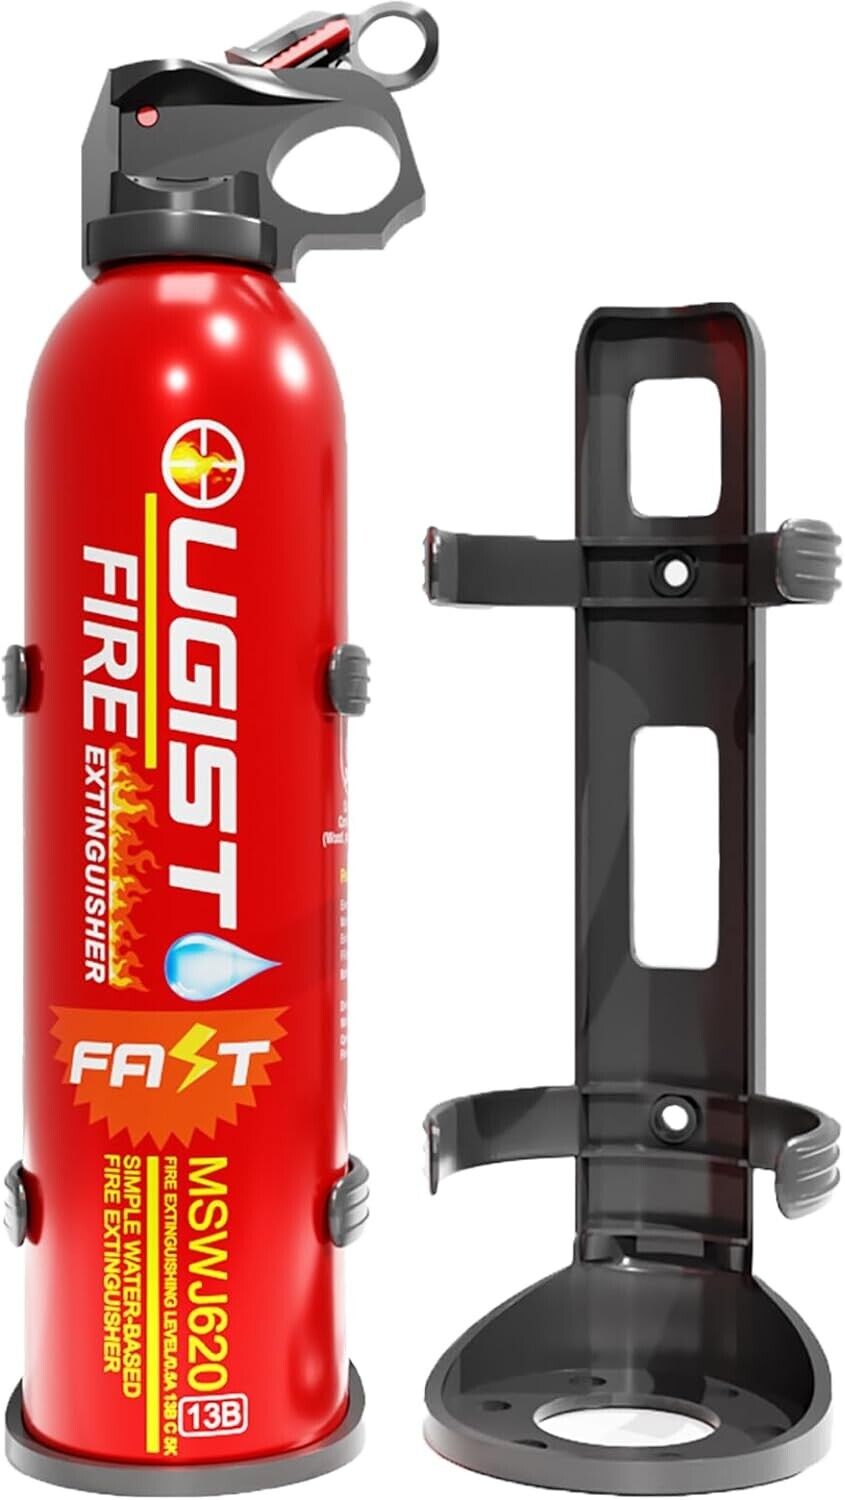 4 In1 Fire Extinguisher with Mount, Portable Fire Extinguishers for House Car